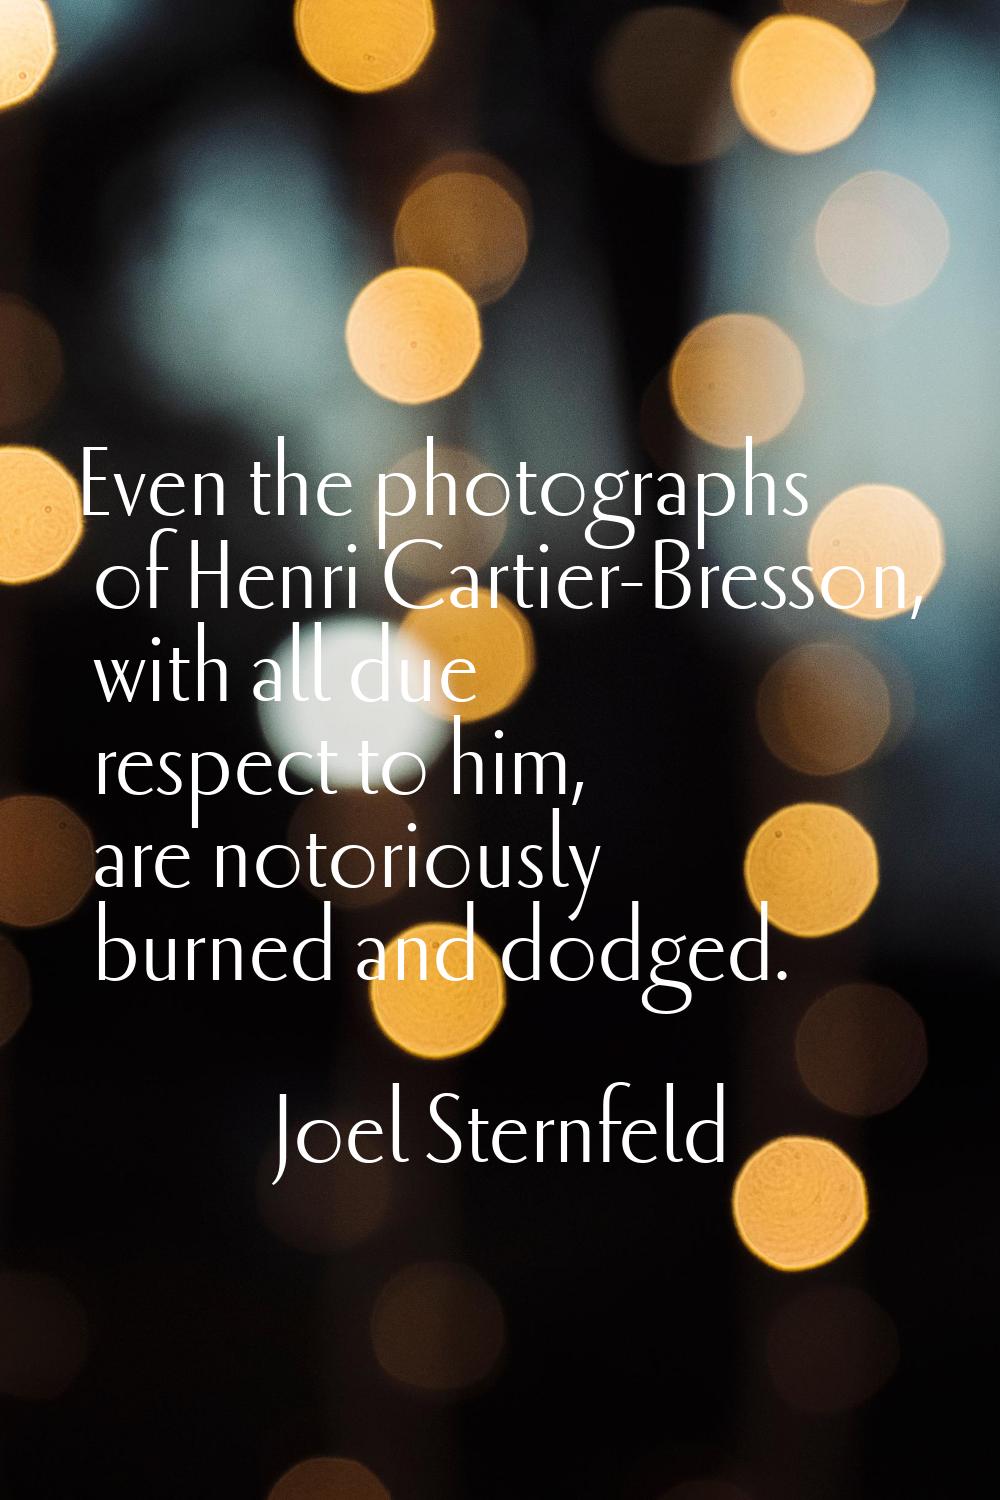 Even the photographs of Henri Cartier-Bresson, with all due respect to him, are notoriously burned 